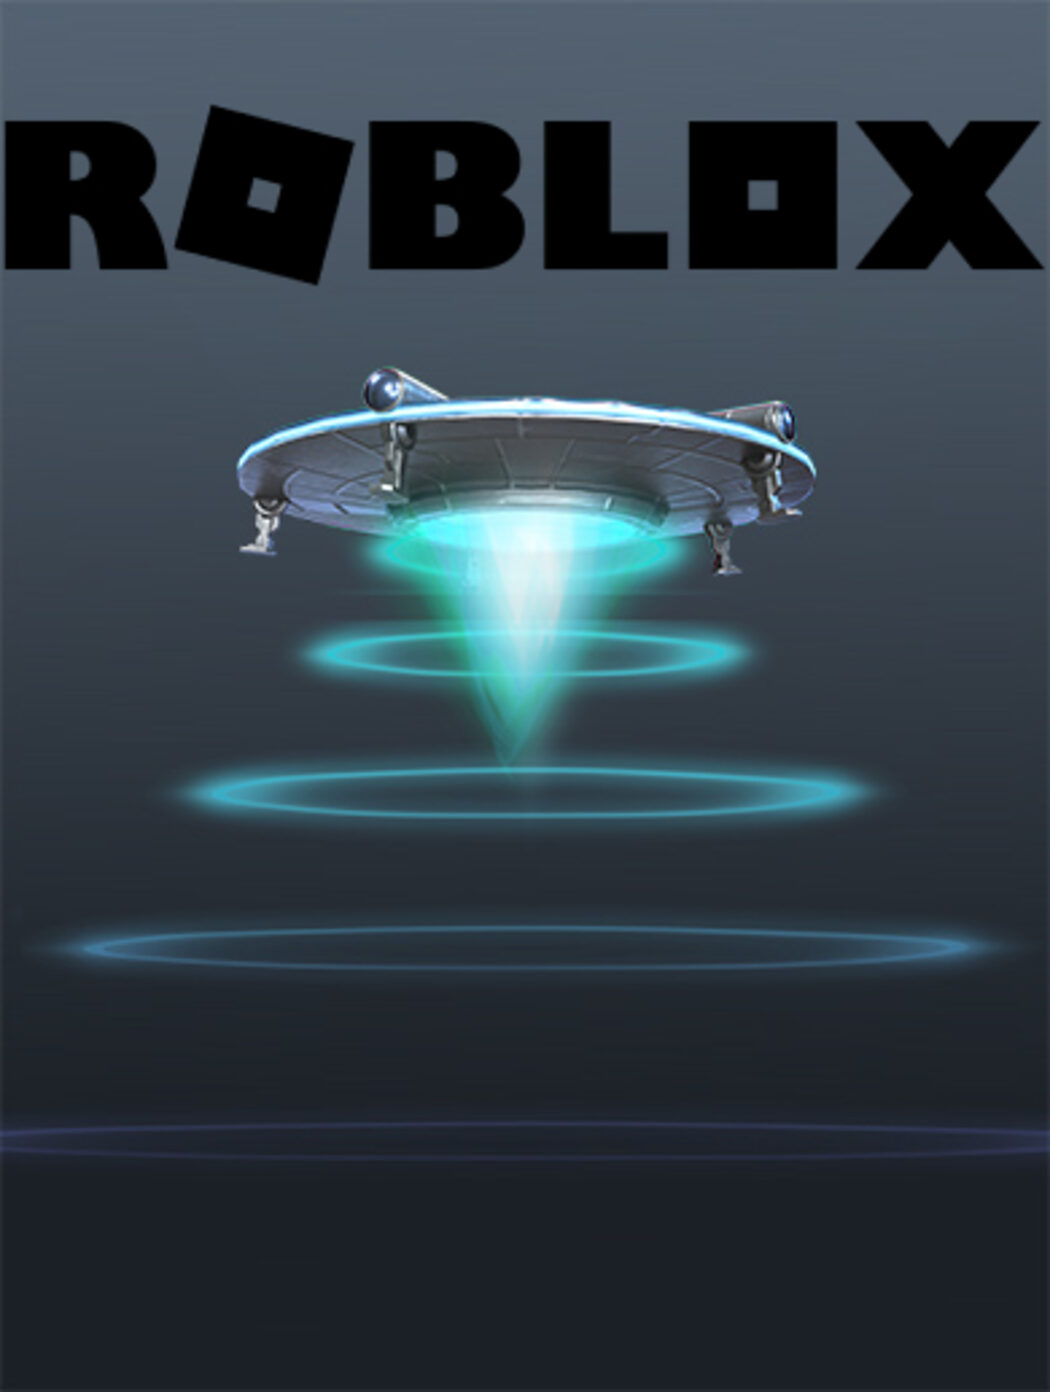 Cheaper Roblox gift cards? Oh yes!